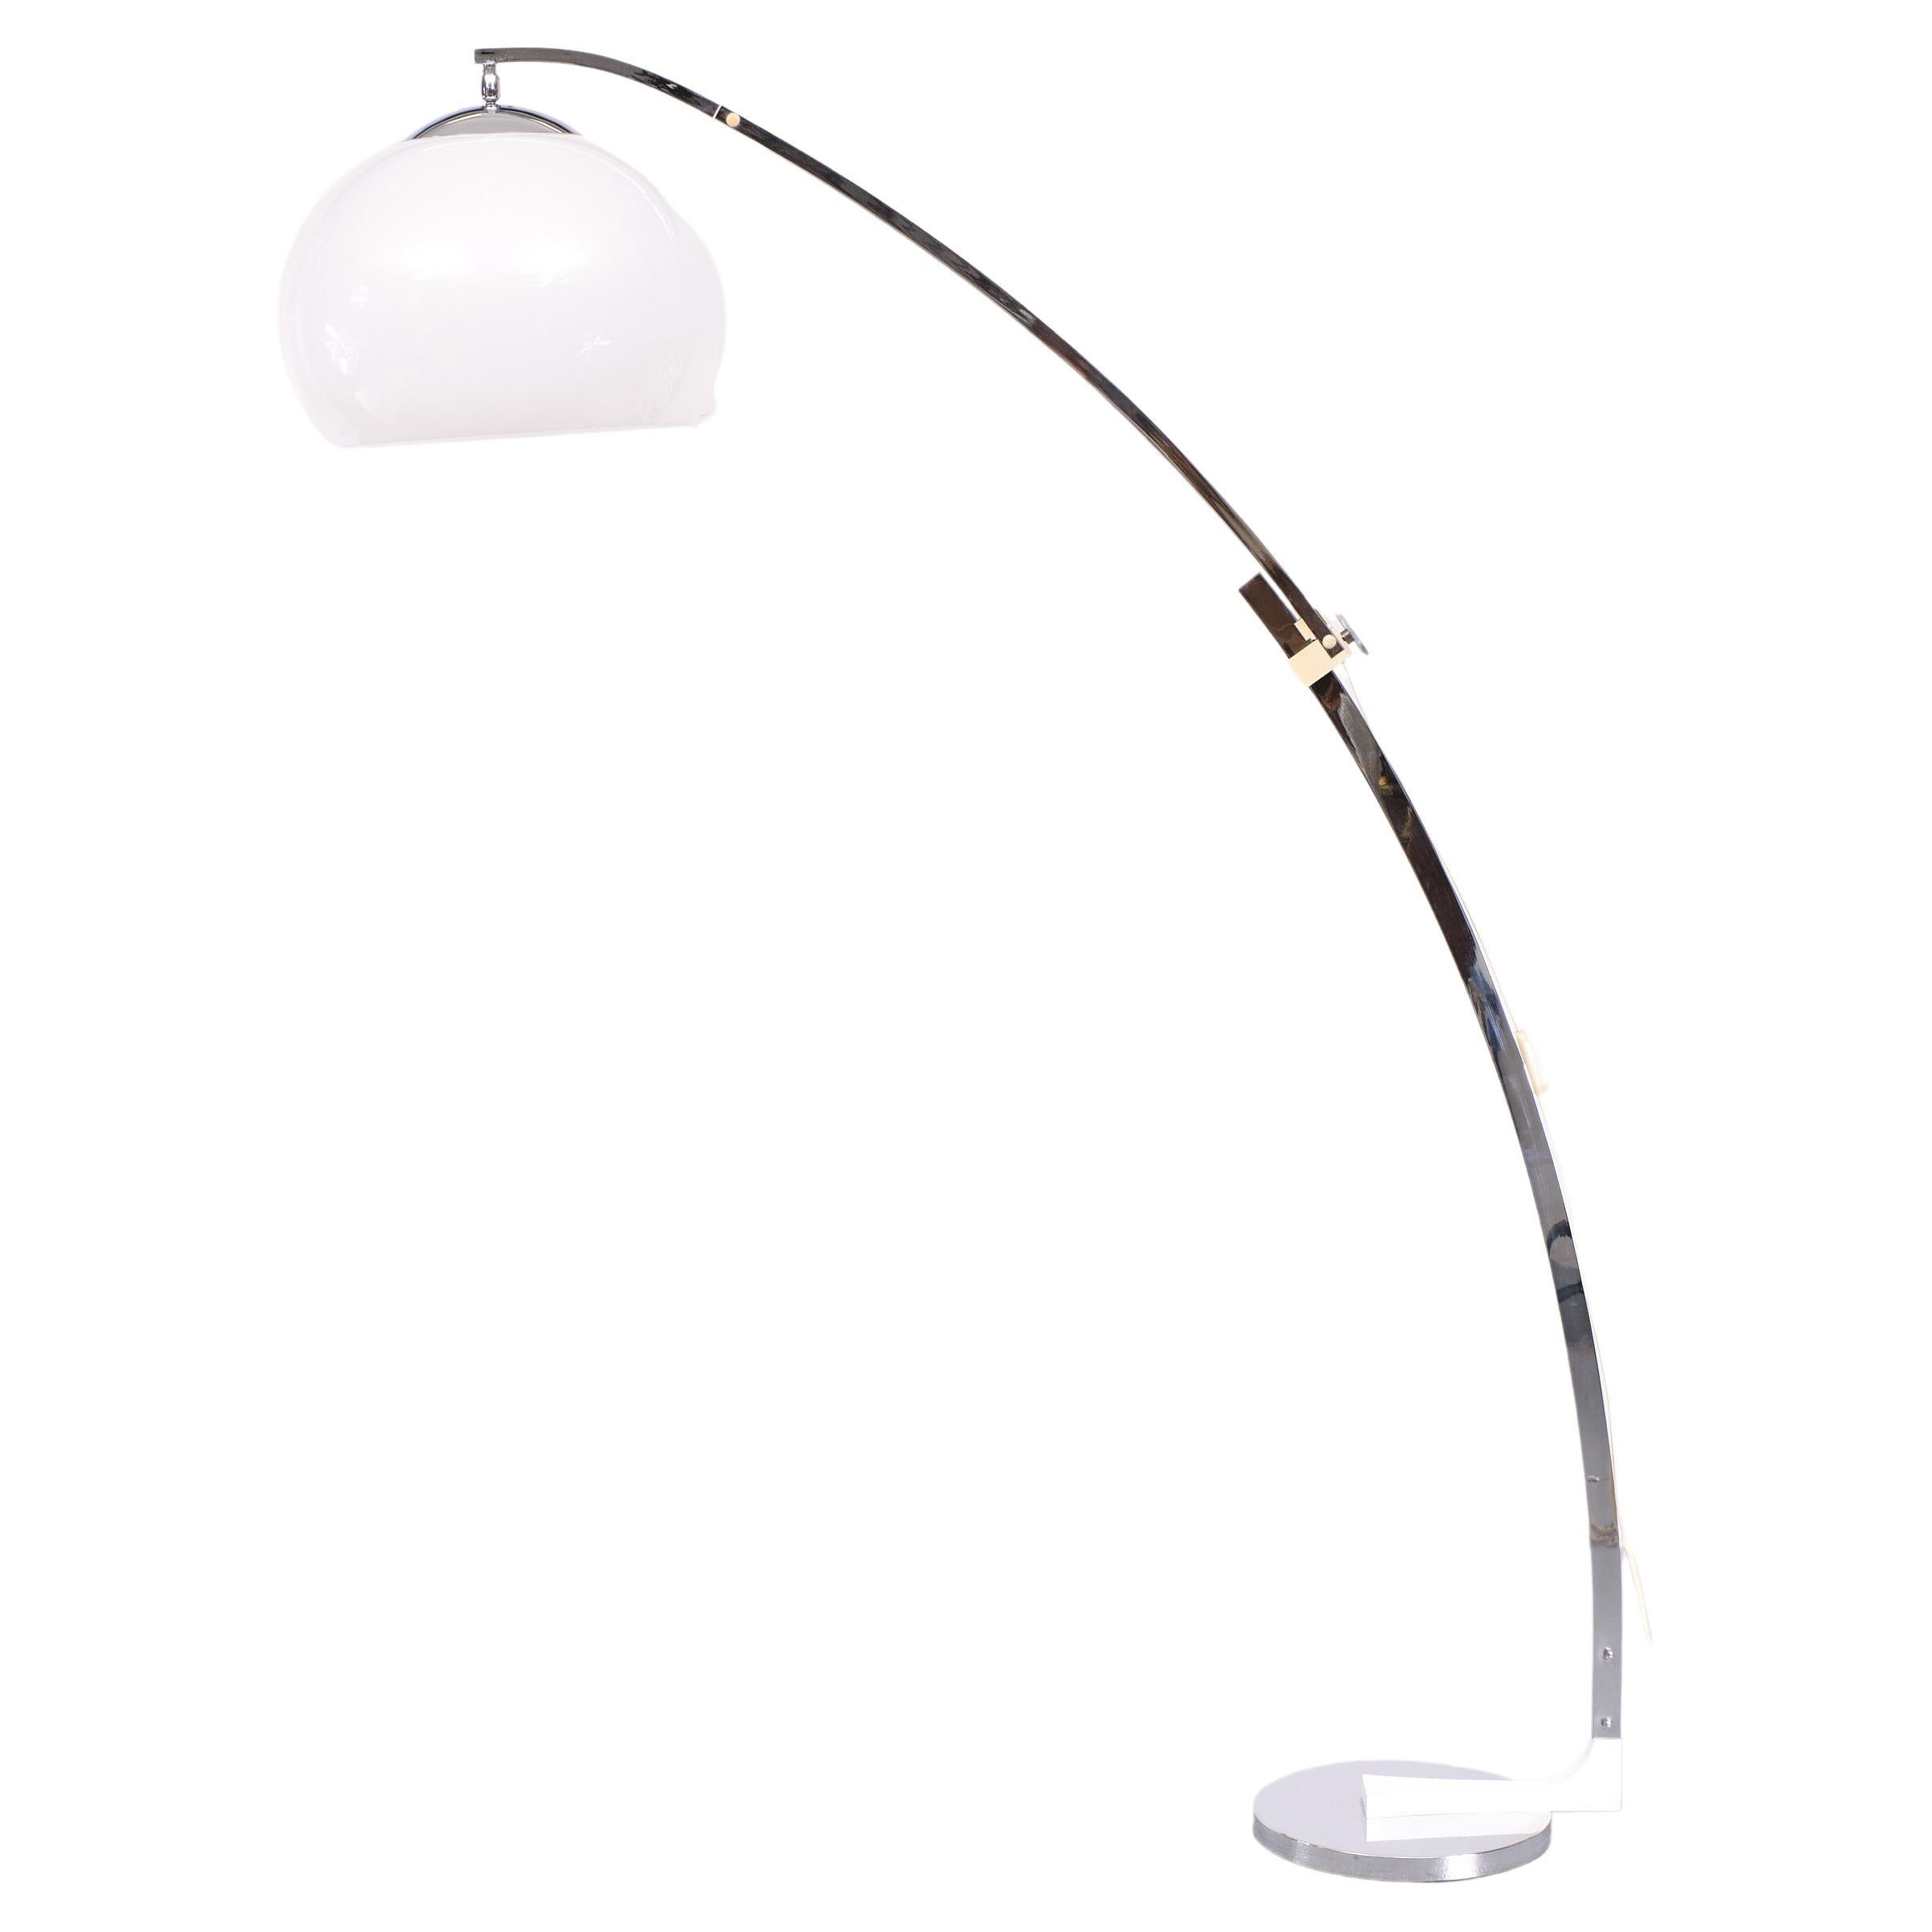 Beautiful Arc floor lamp adjustable in height ,
comes with its original White 
translucent Plastic .Curved Chrome shaped upright .Still in a very good condition . 
Design Goffredo Reggiani  1970s Italy 
Please don't hesitate to reach out for